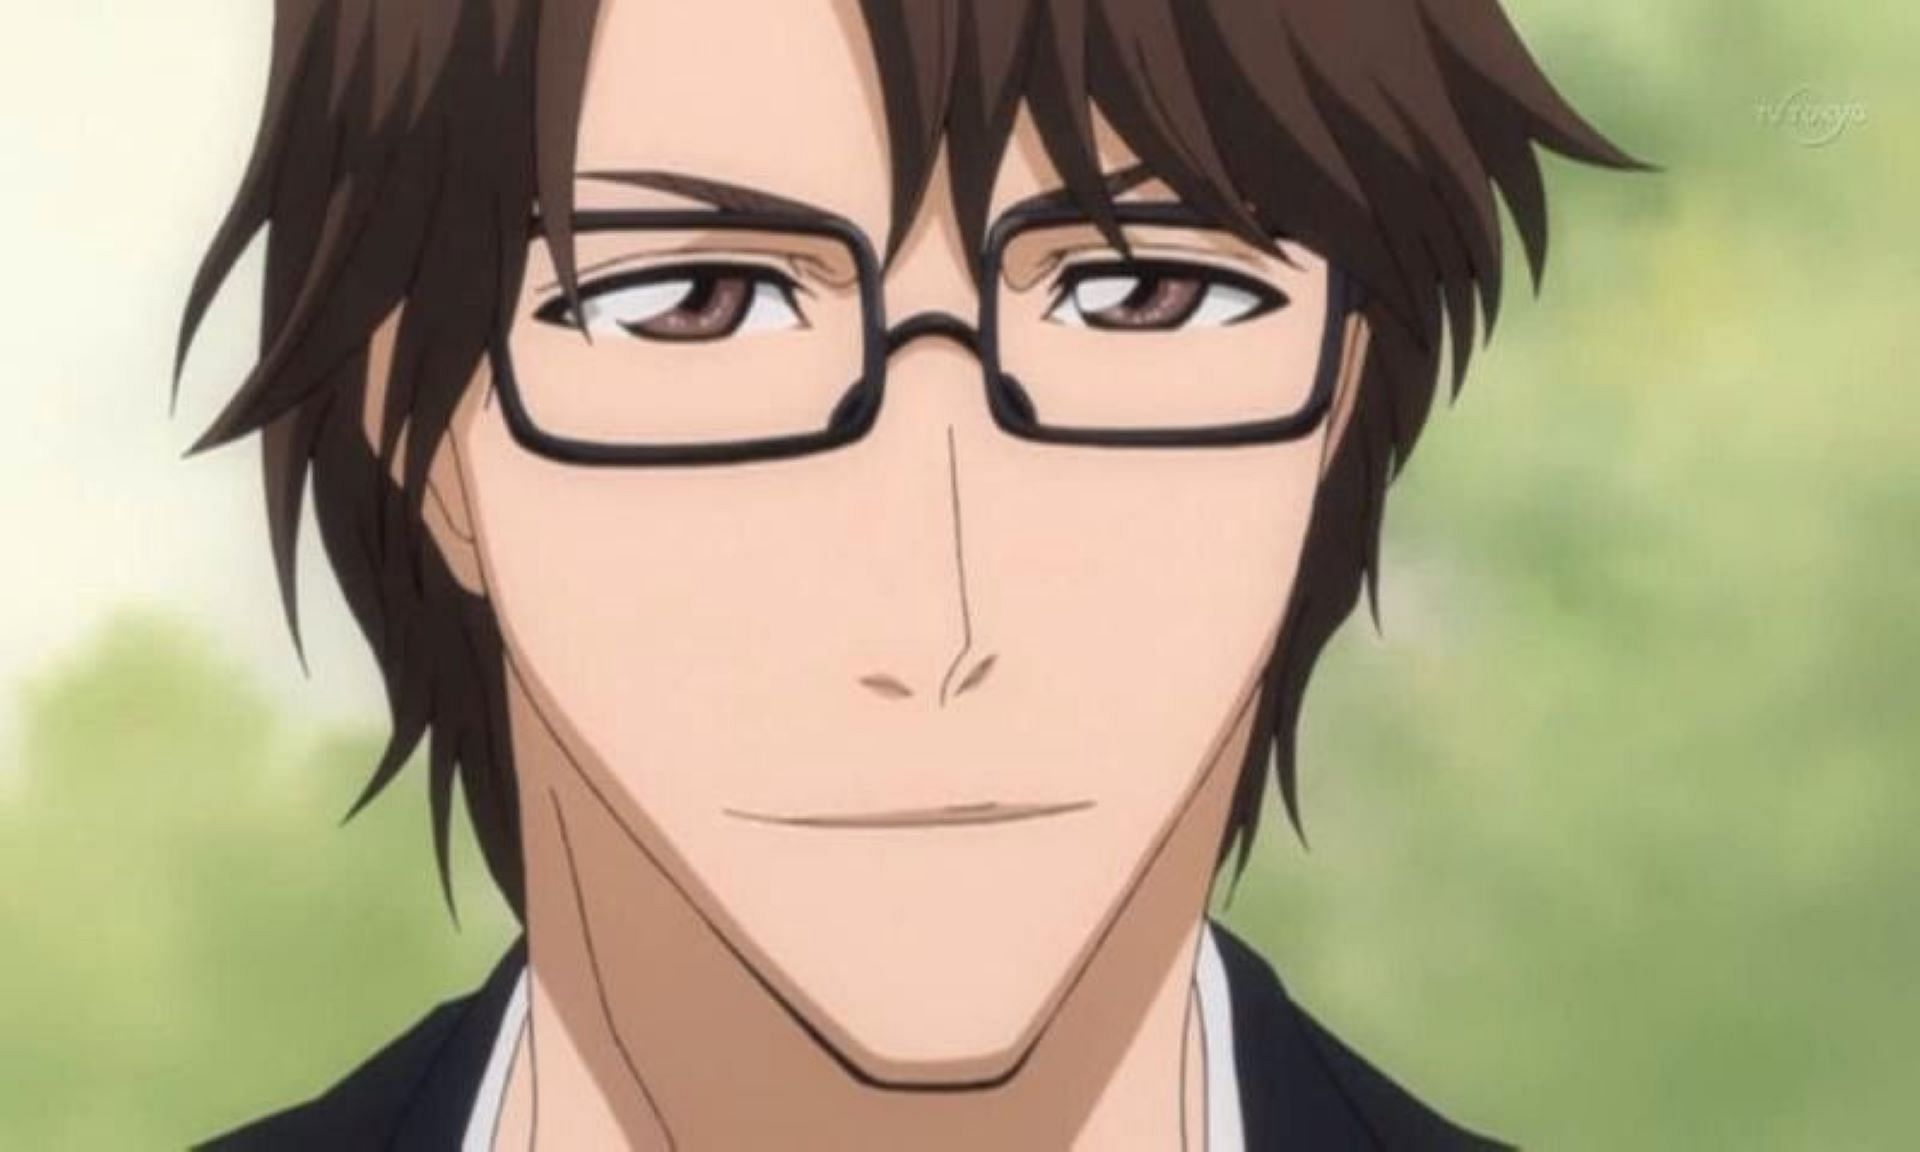 Aizen as seen in the anime (Image via Pierrot)